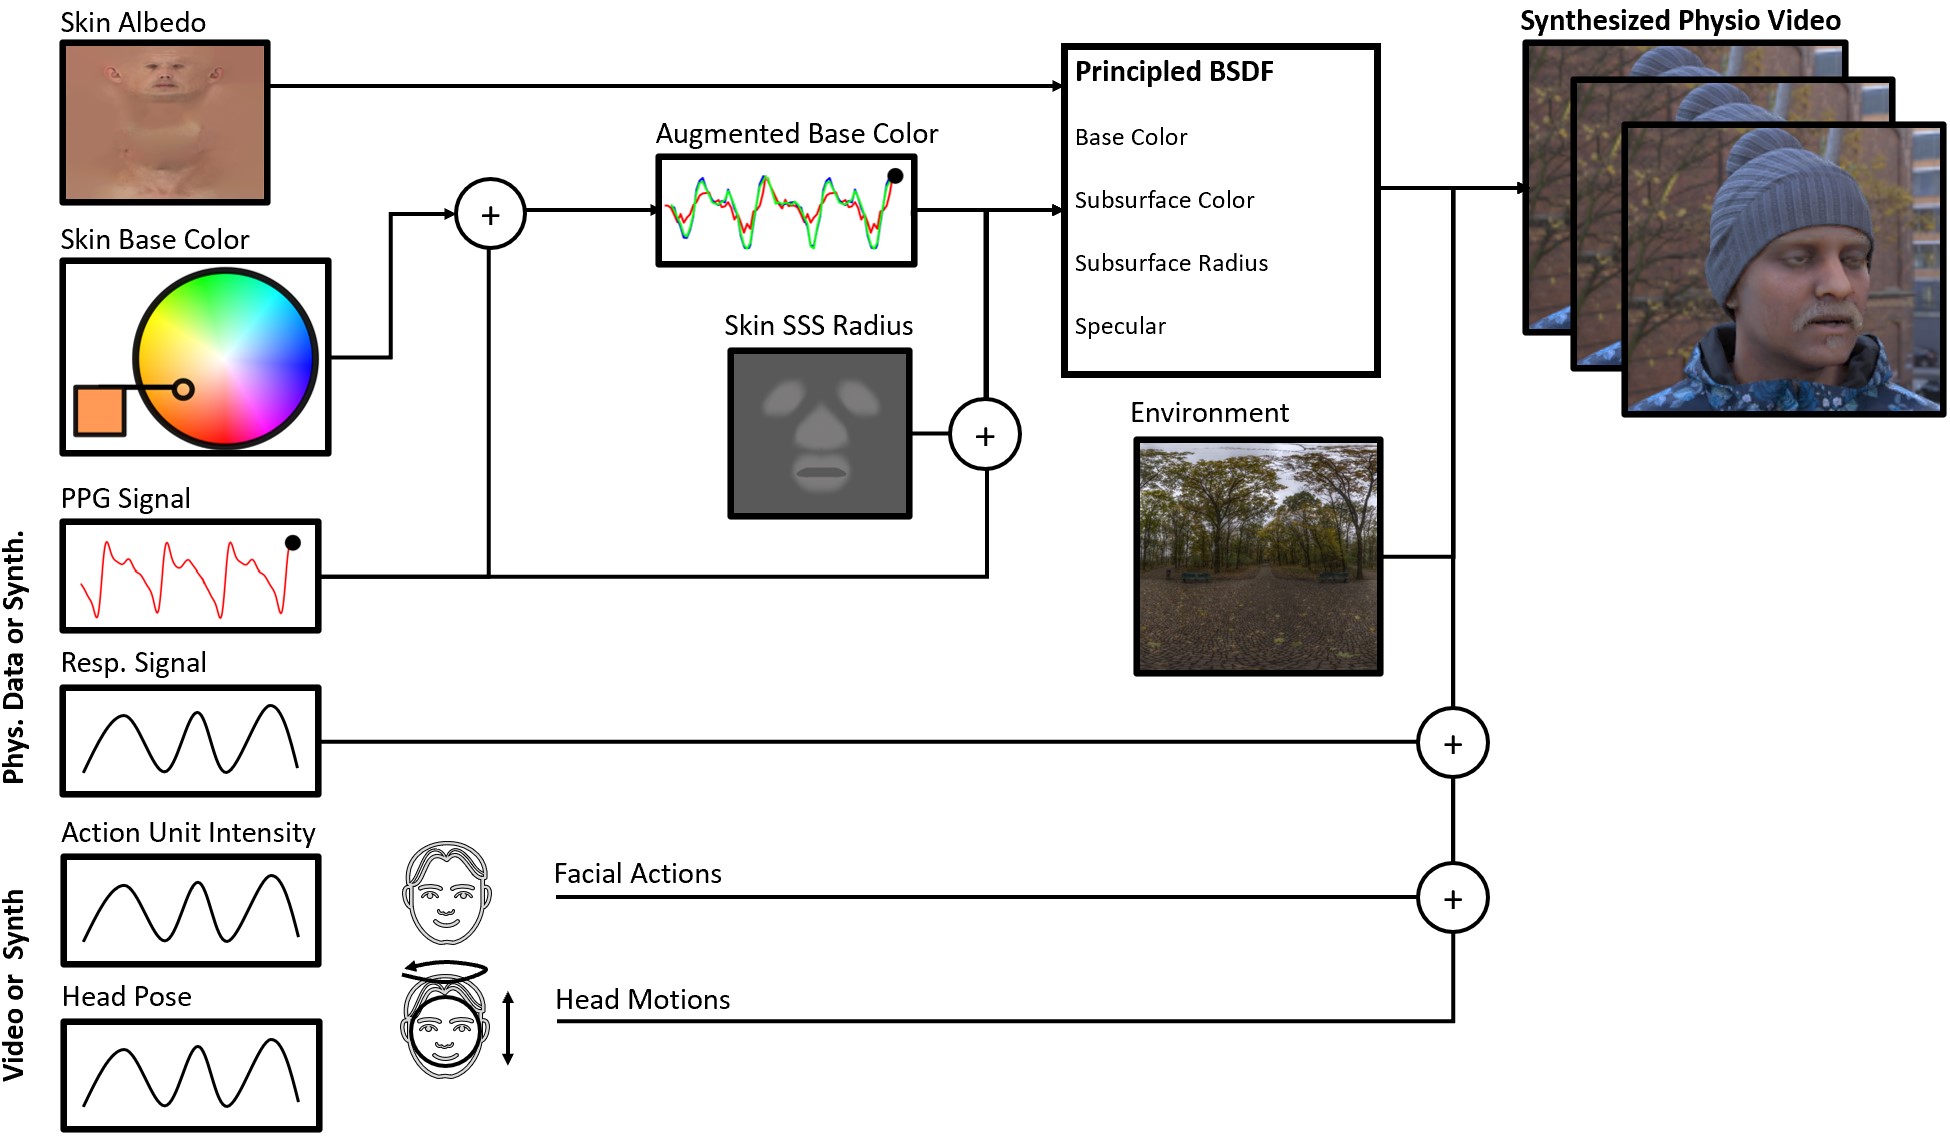 An image of a system diagram which shows how the synthetic avatars were created. The base skin albedo is altered using the blood volume pulse signal and then clothing, hair and background are added